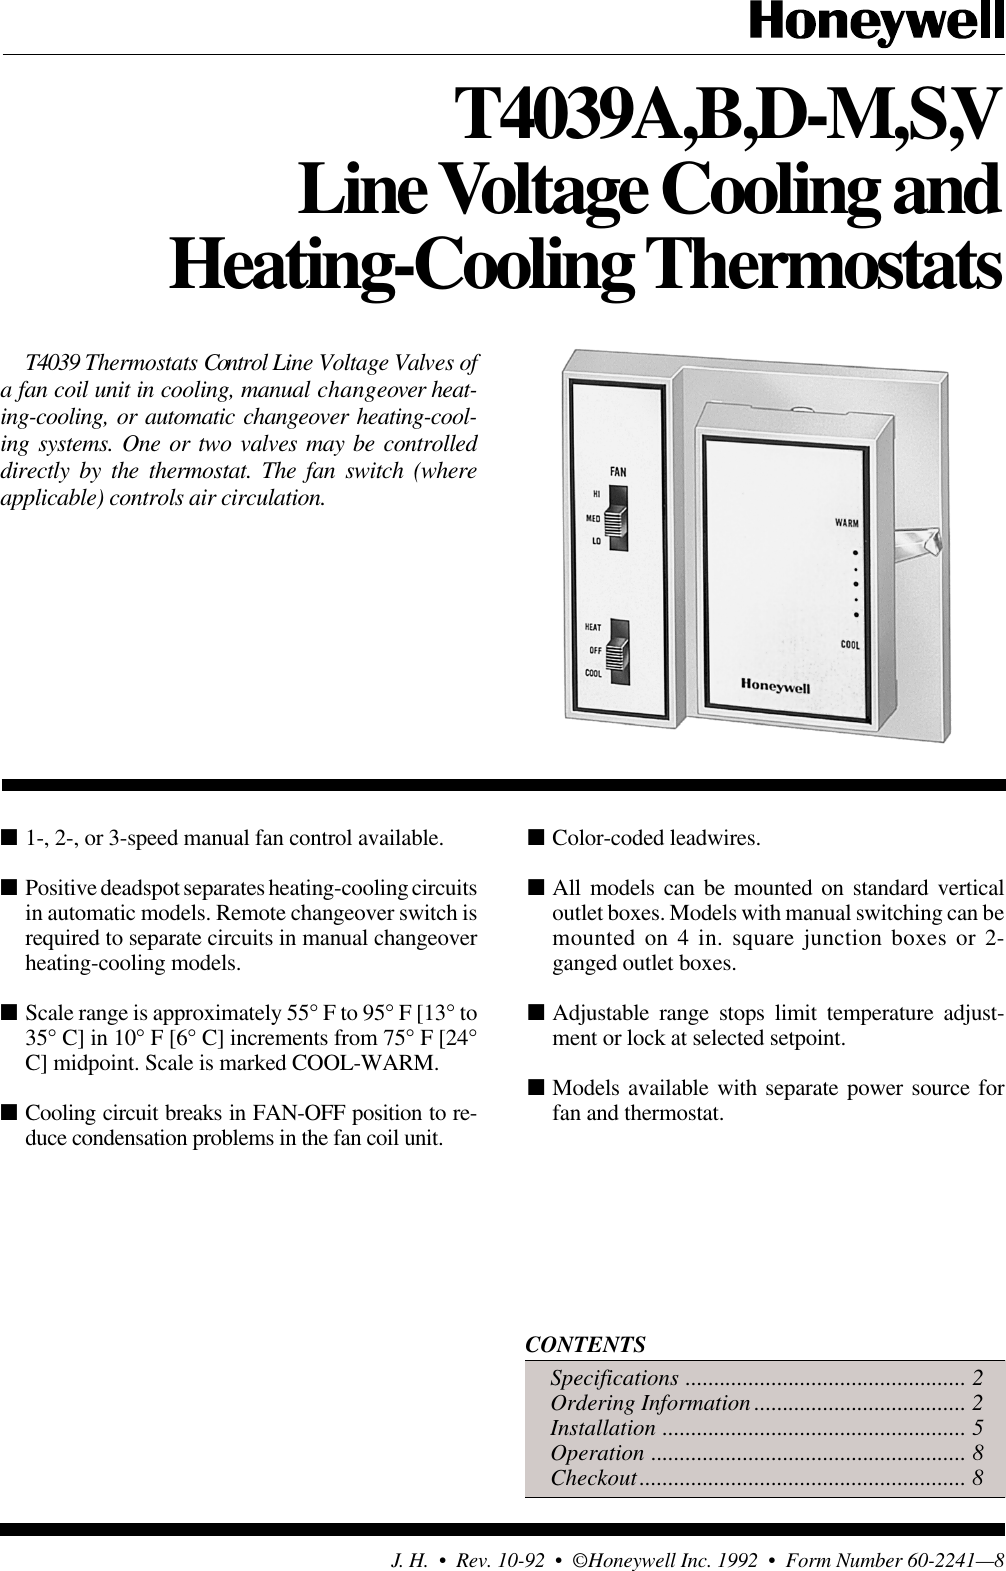 Page 1 of 8 - Honeywell Honeywell-T4039A-Users-Manual- 60-2241 - T4039A,B,D-M,S,V Line Voltage Cooling And Heating-Cooling Thermostats  Honeywell-t4039a-users-manual